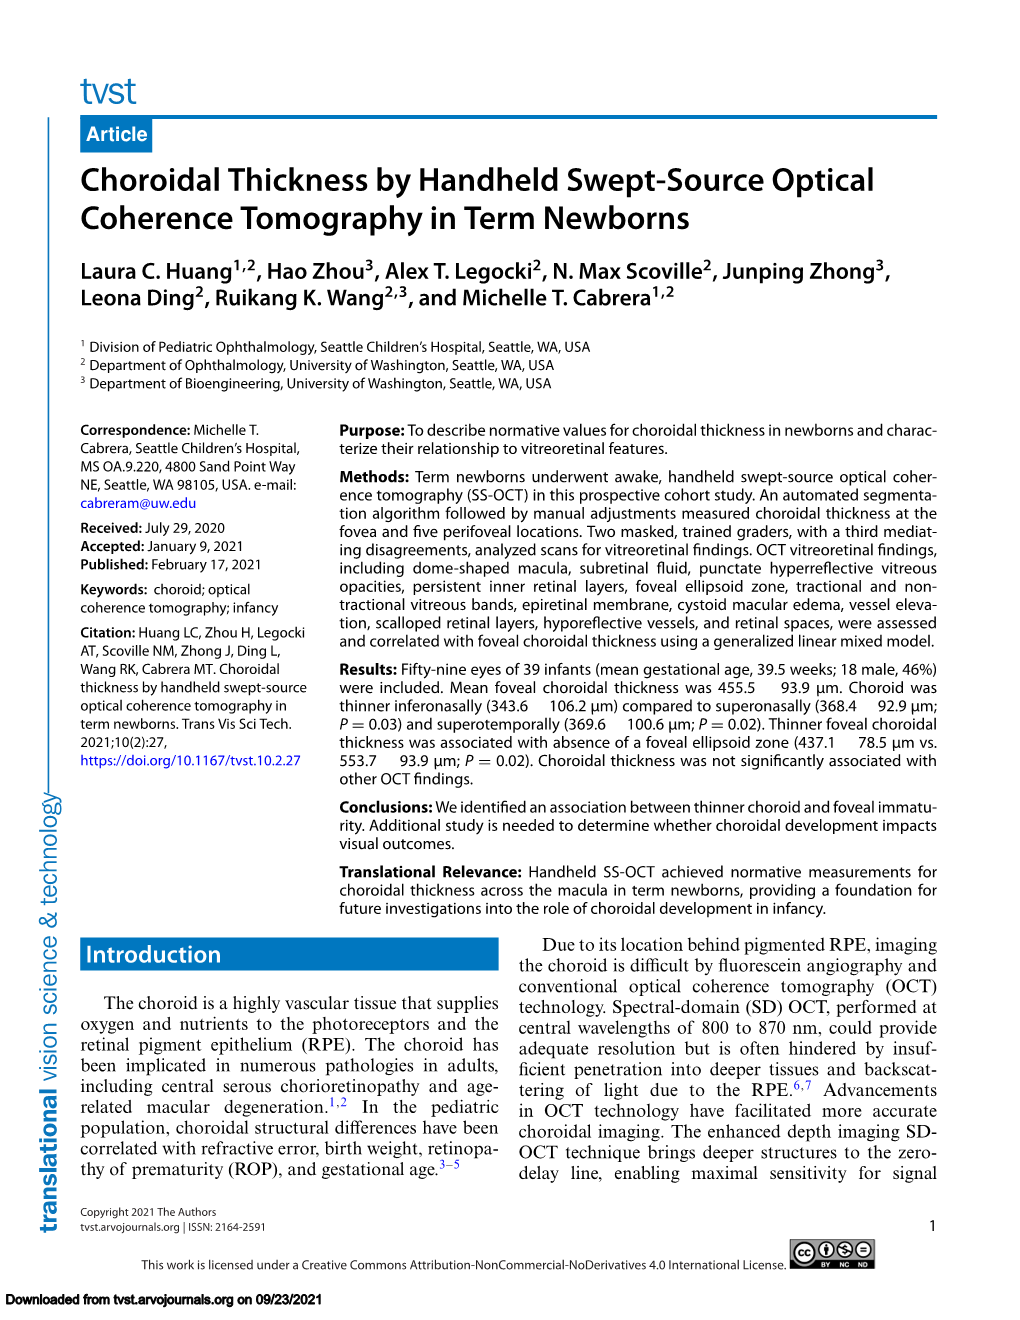 Choroidal Thickness by Handheld Swept-Source Optical Coherence Tomography in Term Newborns